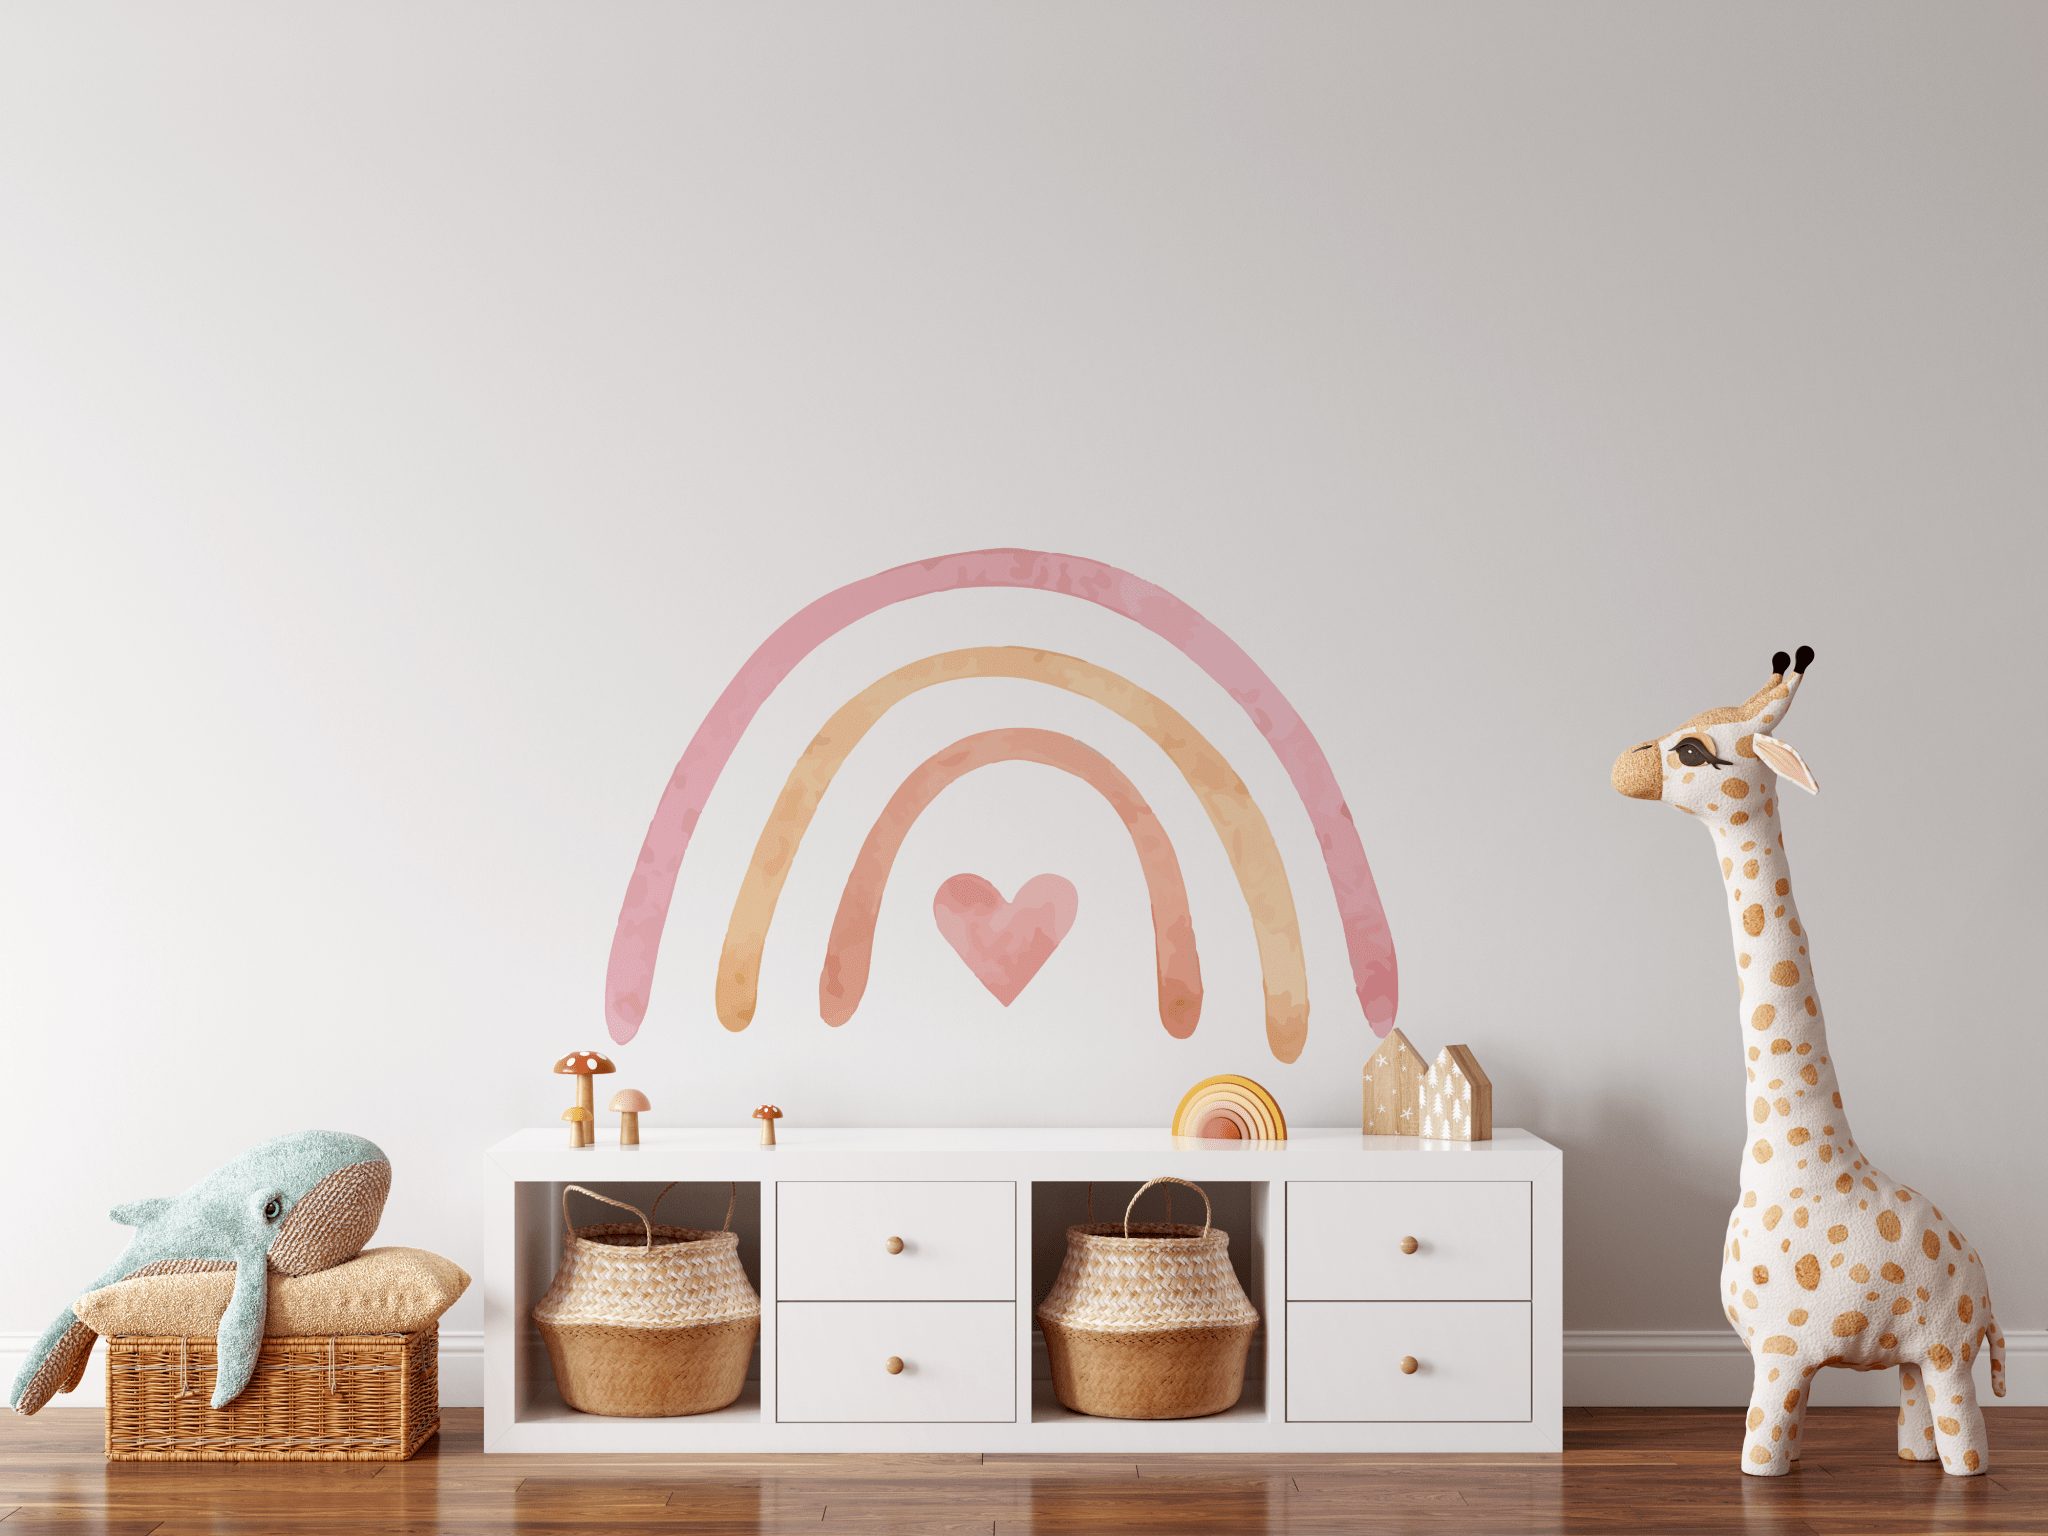 A children's playroom with a pastel rainbow wall sticker above a white dresser. The room has a whimsical feel with a large plush dolphin toy on a wicker bench, a giraffe-shaped toy, and woven baskets for storage.